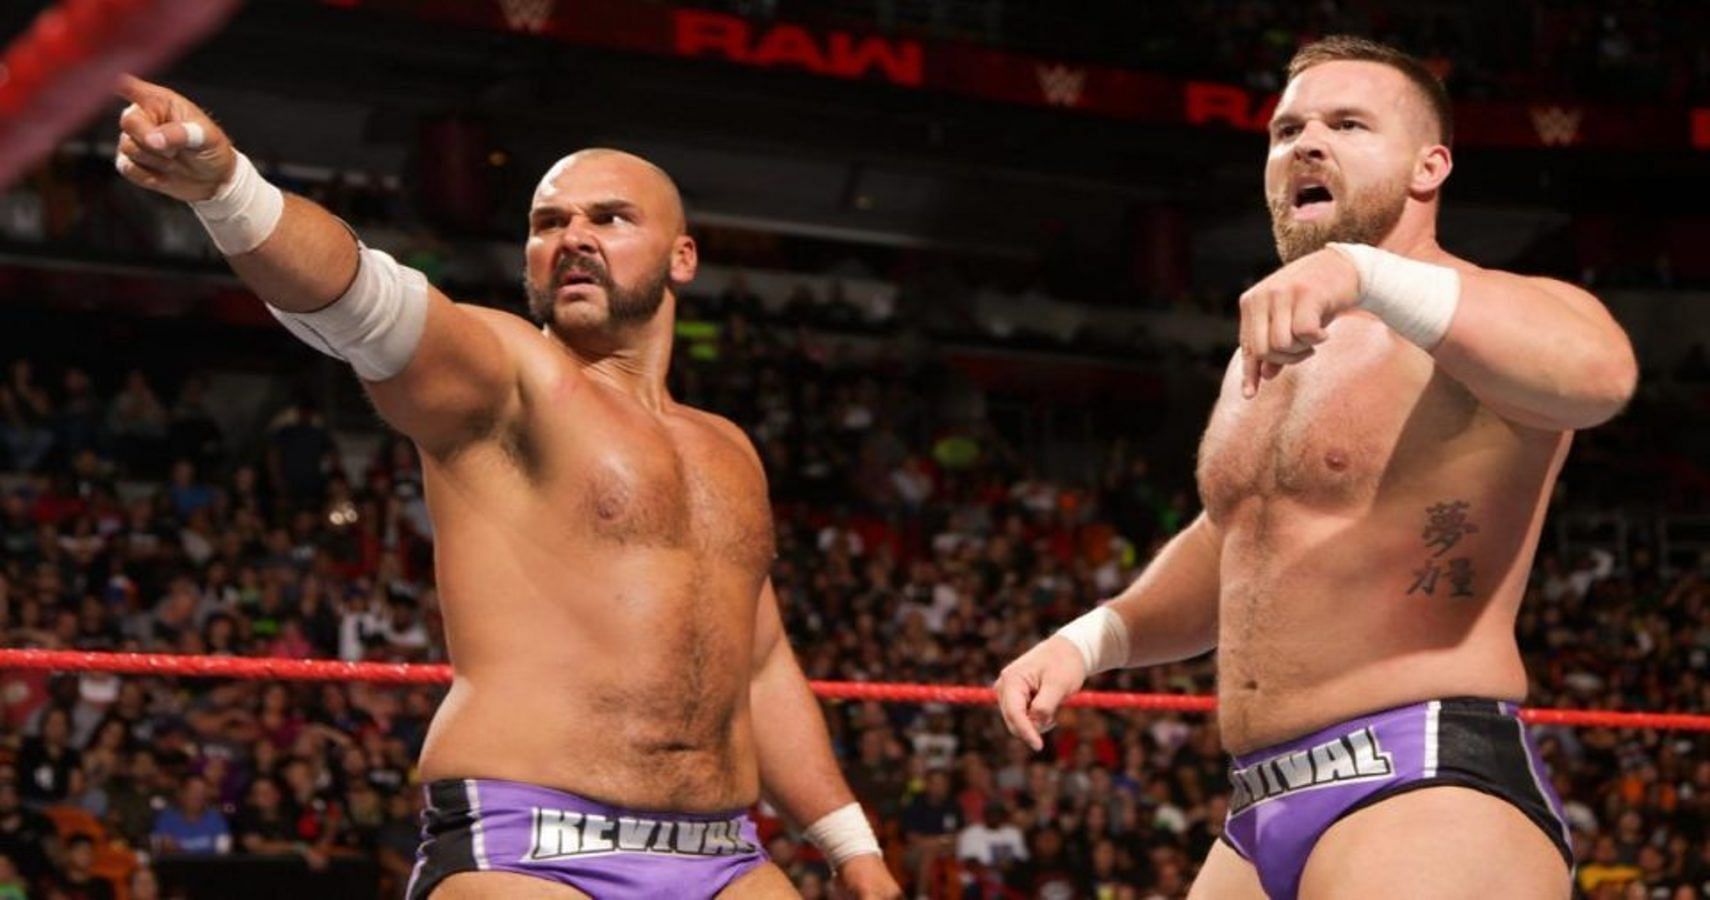 The Revival won tag team titles in both WWE and AEW.